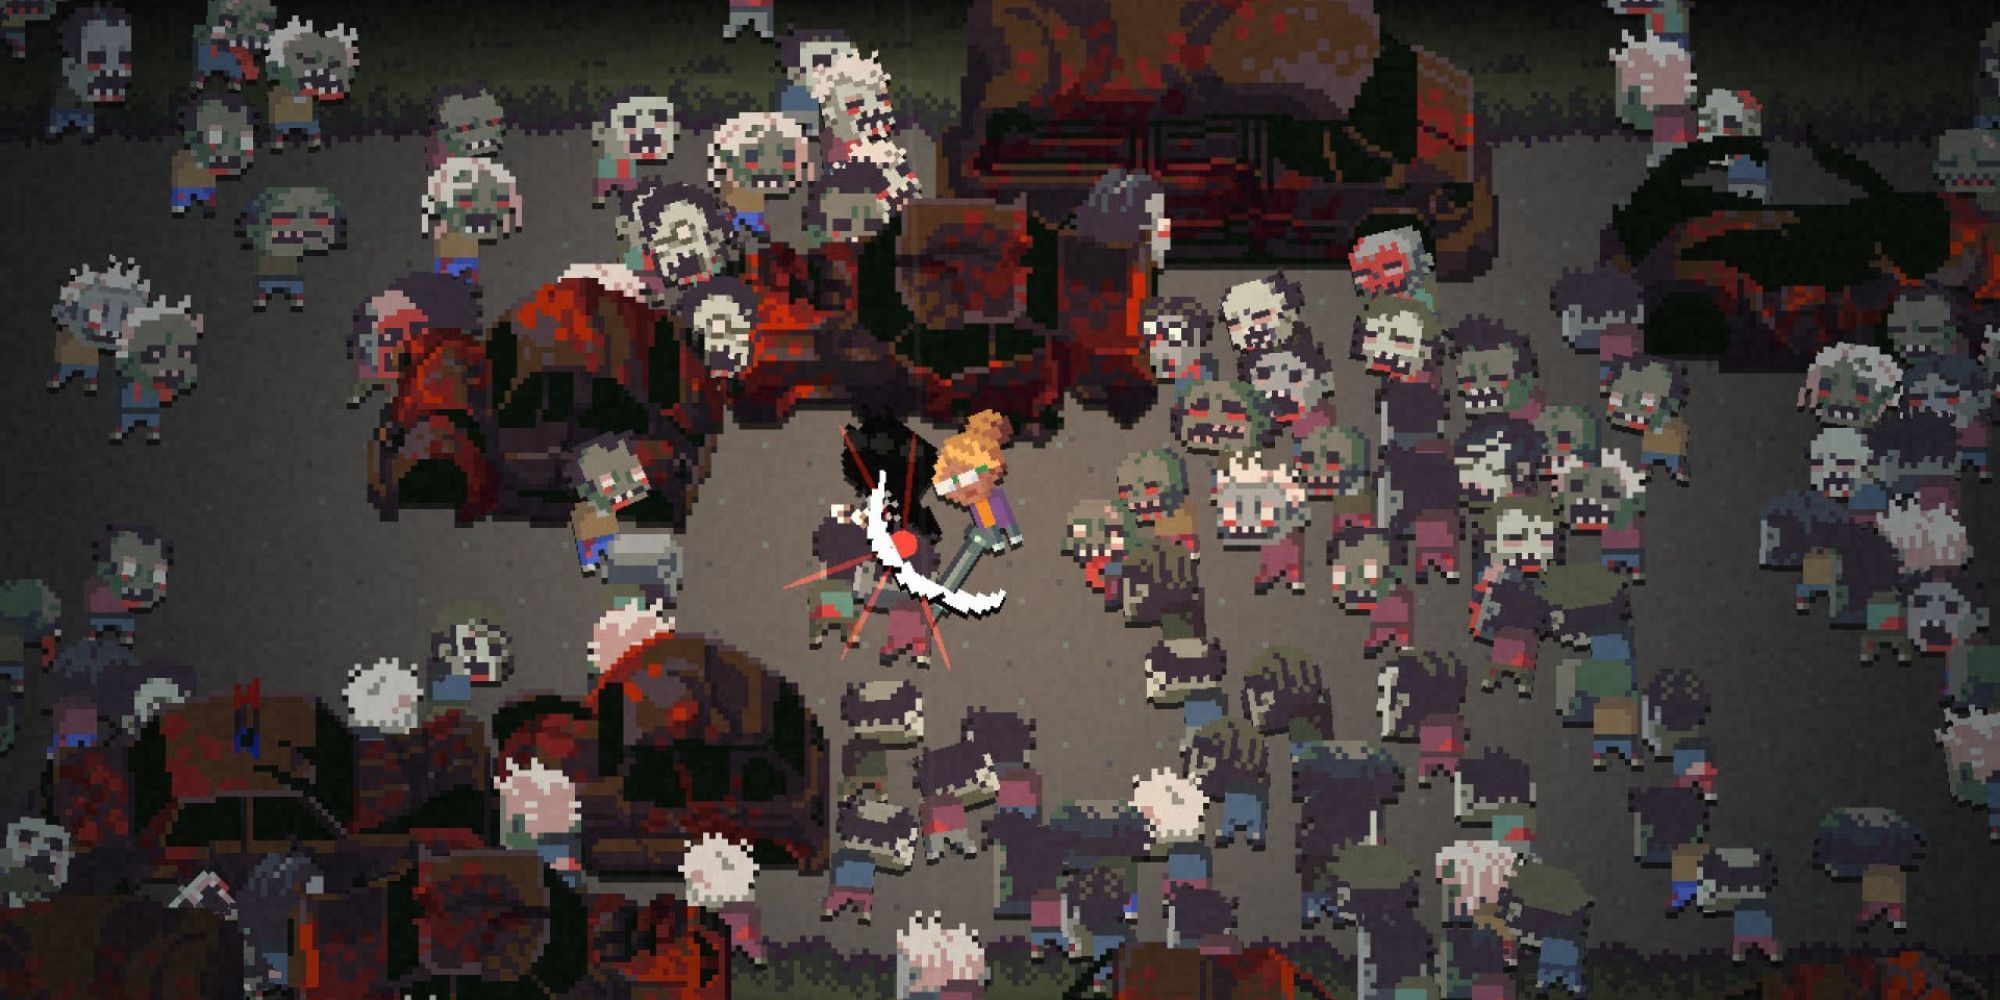 Image from the game Death Road to Canada featuring the player character fighting hordes of zombies